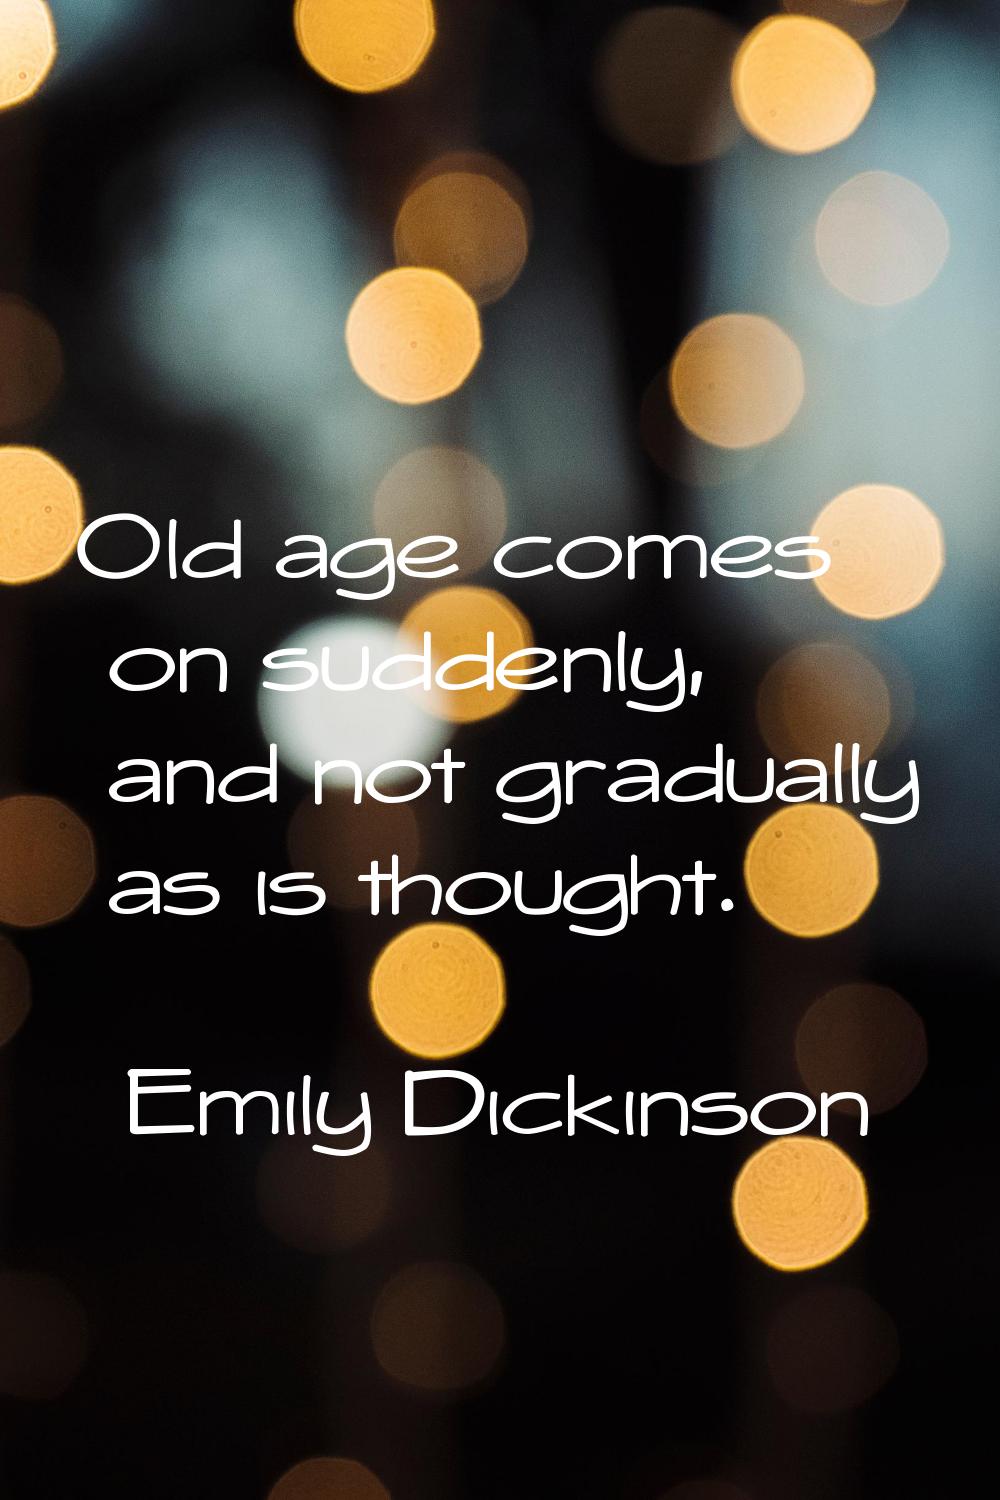 Old age comes on suddenly, and not gradually as is thought.